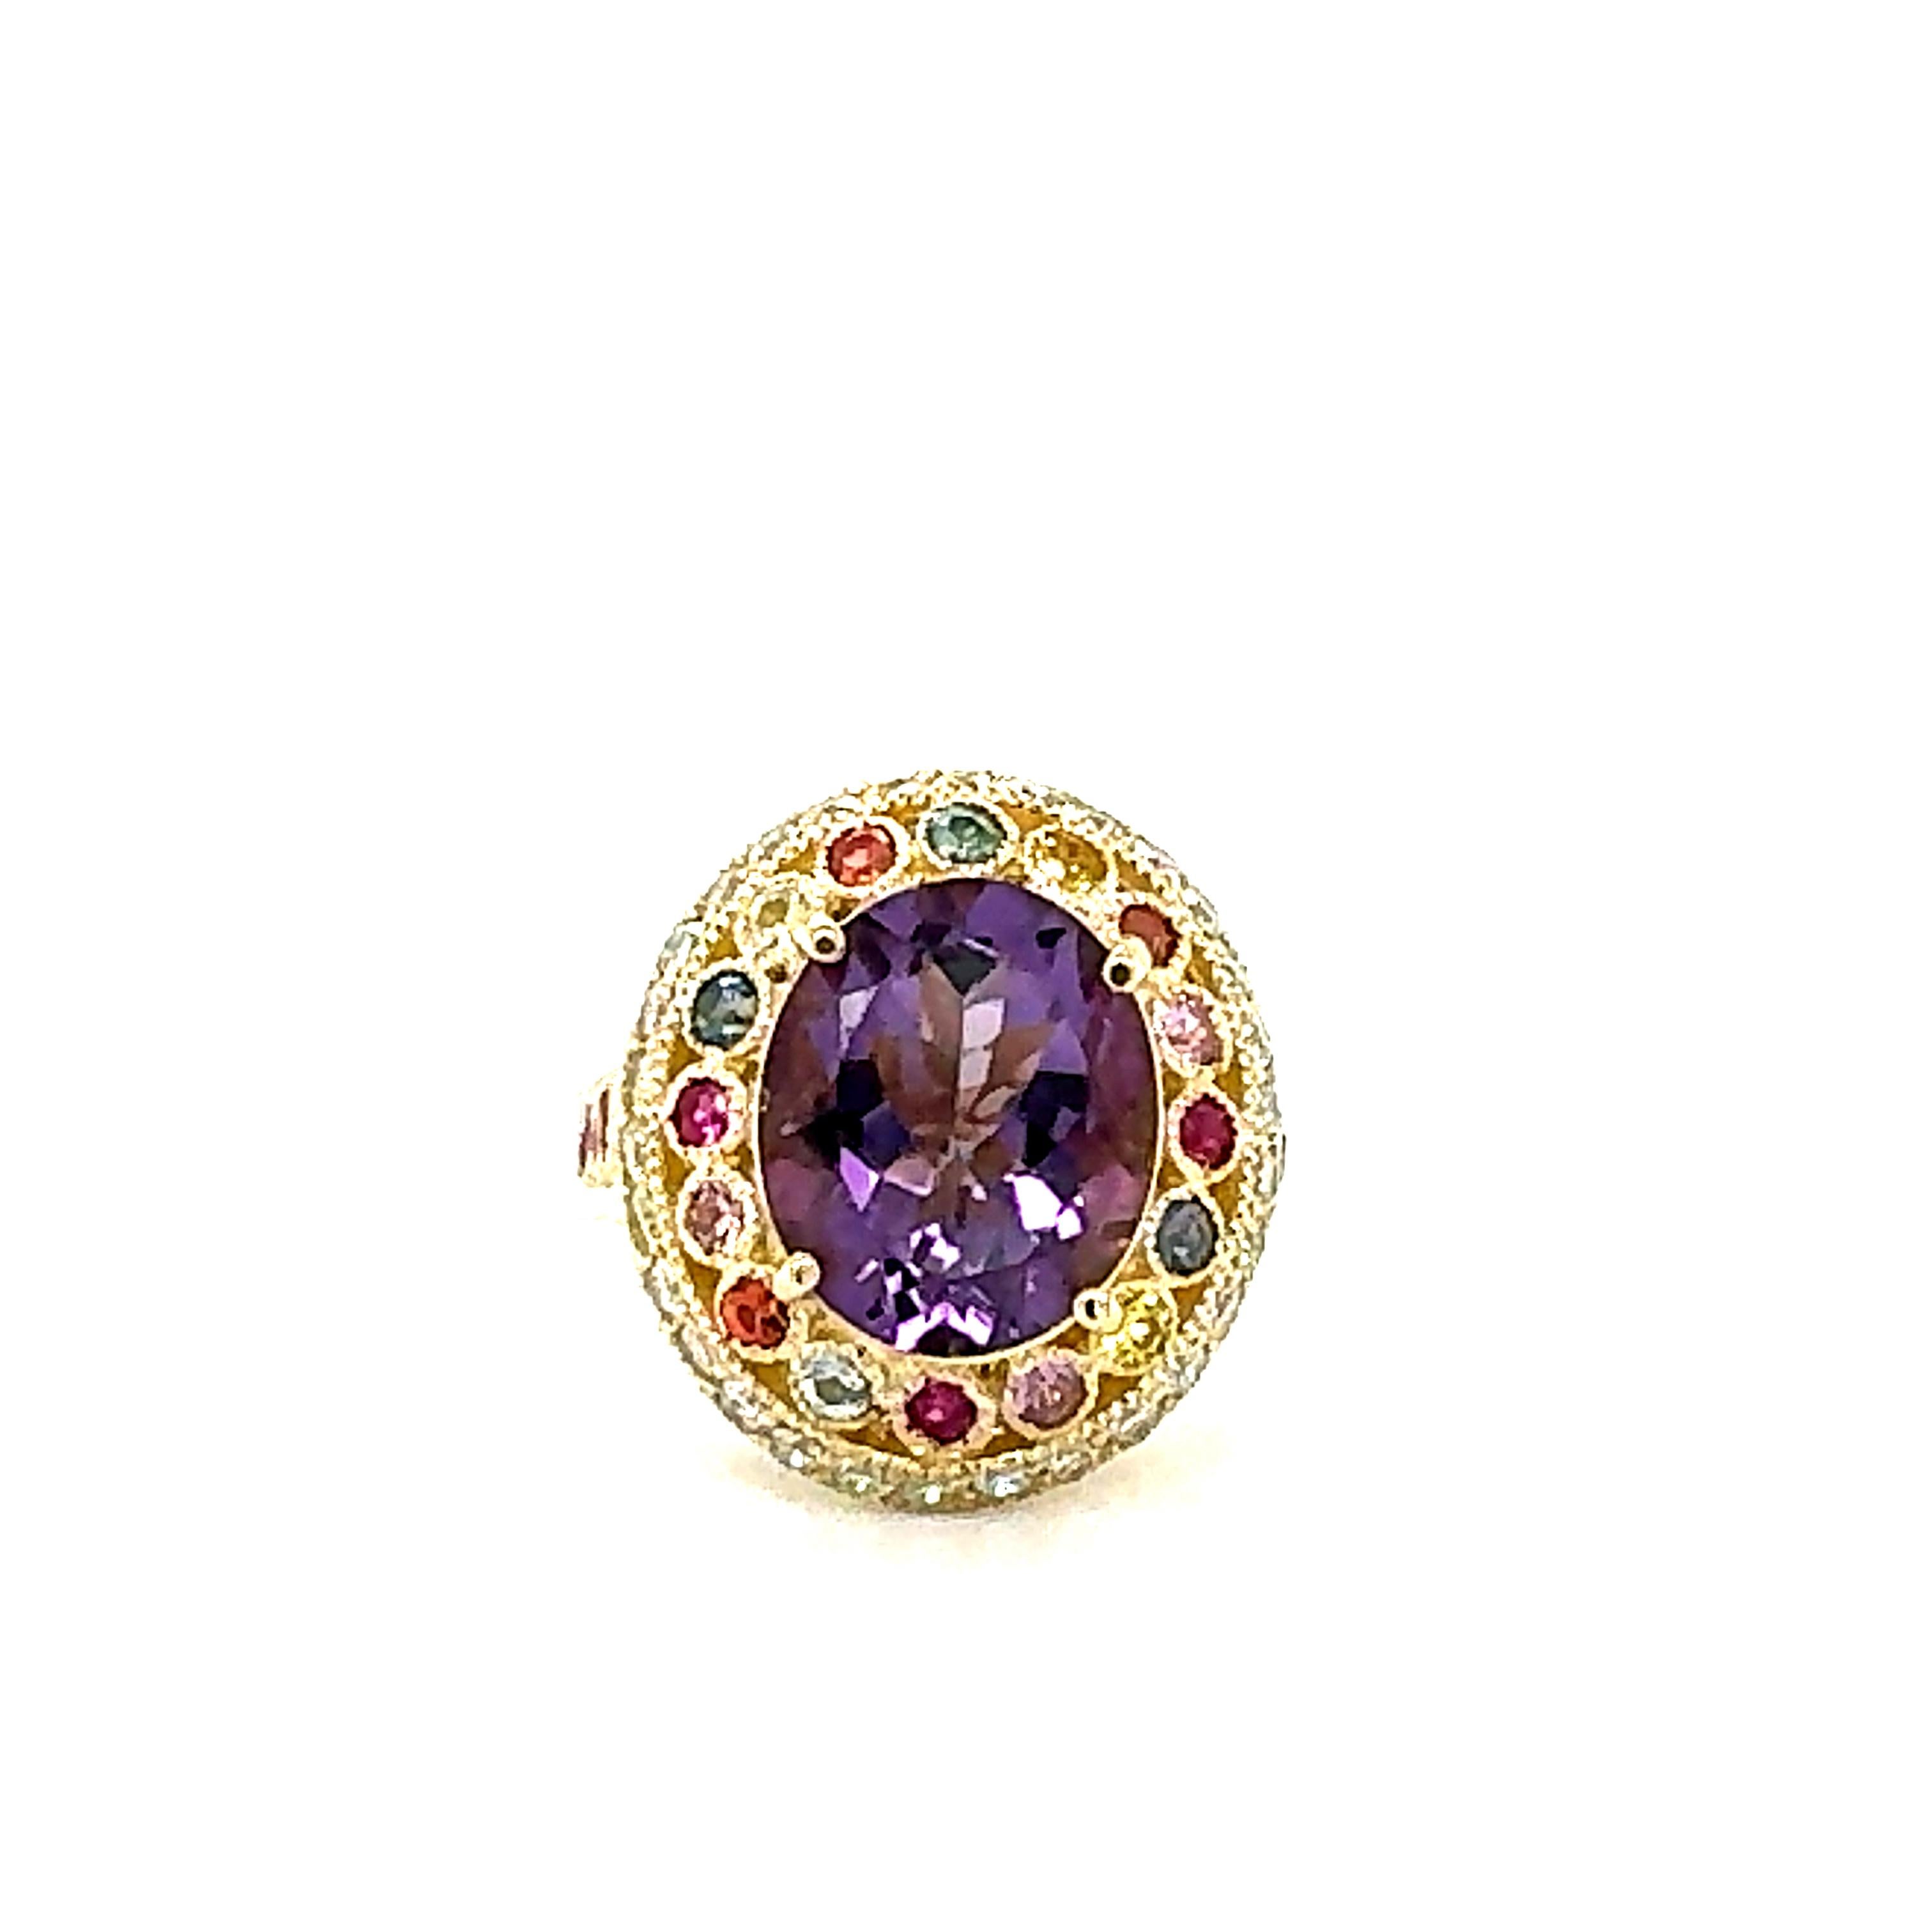 5.62 Carat Natural Amethyst Diamond Sapphire Yellow Gold Cocktail Ring

This ring has a bright and vivid purple Oval Cut Amethyst that weighs 4.00 Carats and is embellished with 22 Multi-Color Sapphires that weigh 0.95 Carats as well as 30 Round Cut